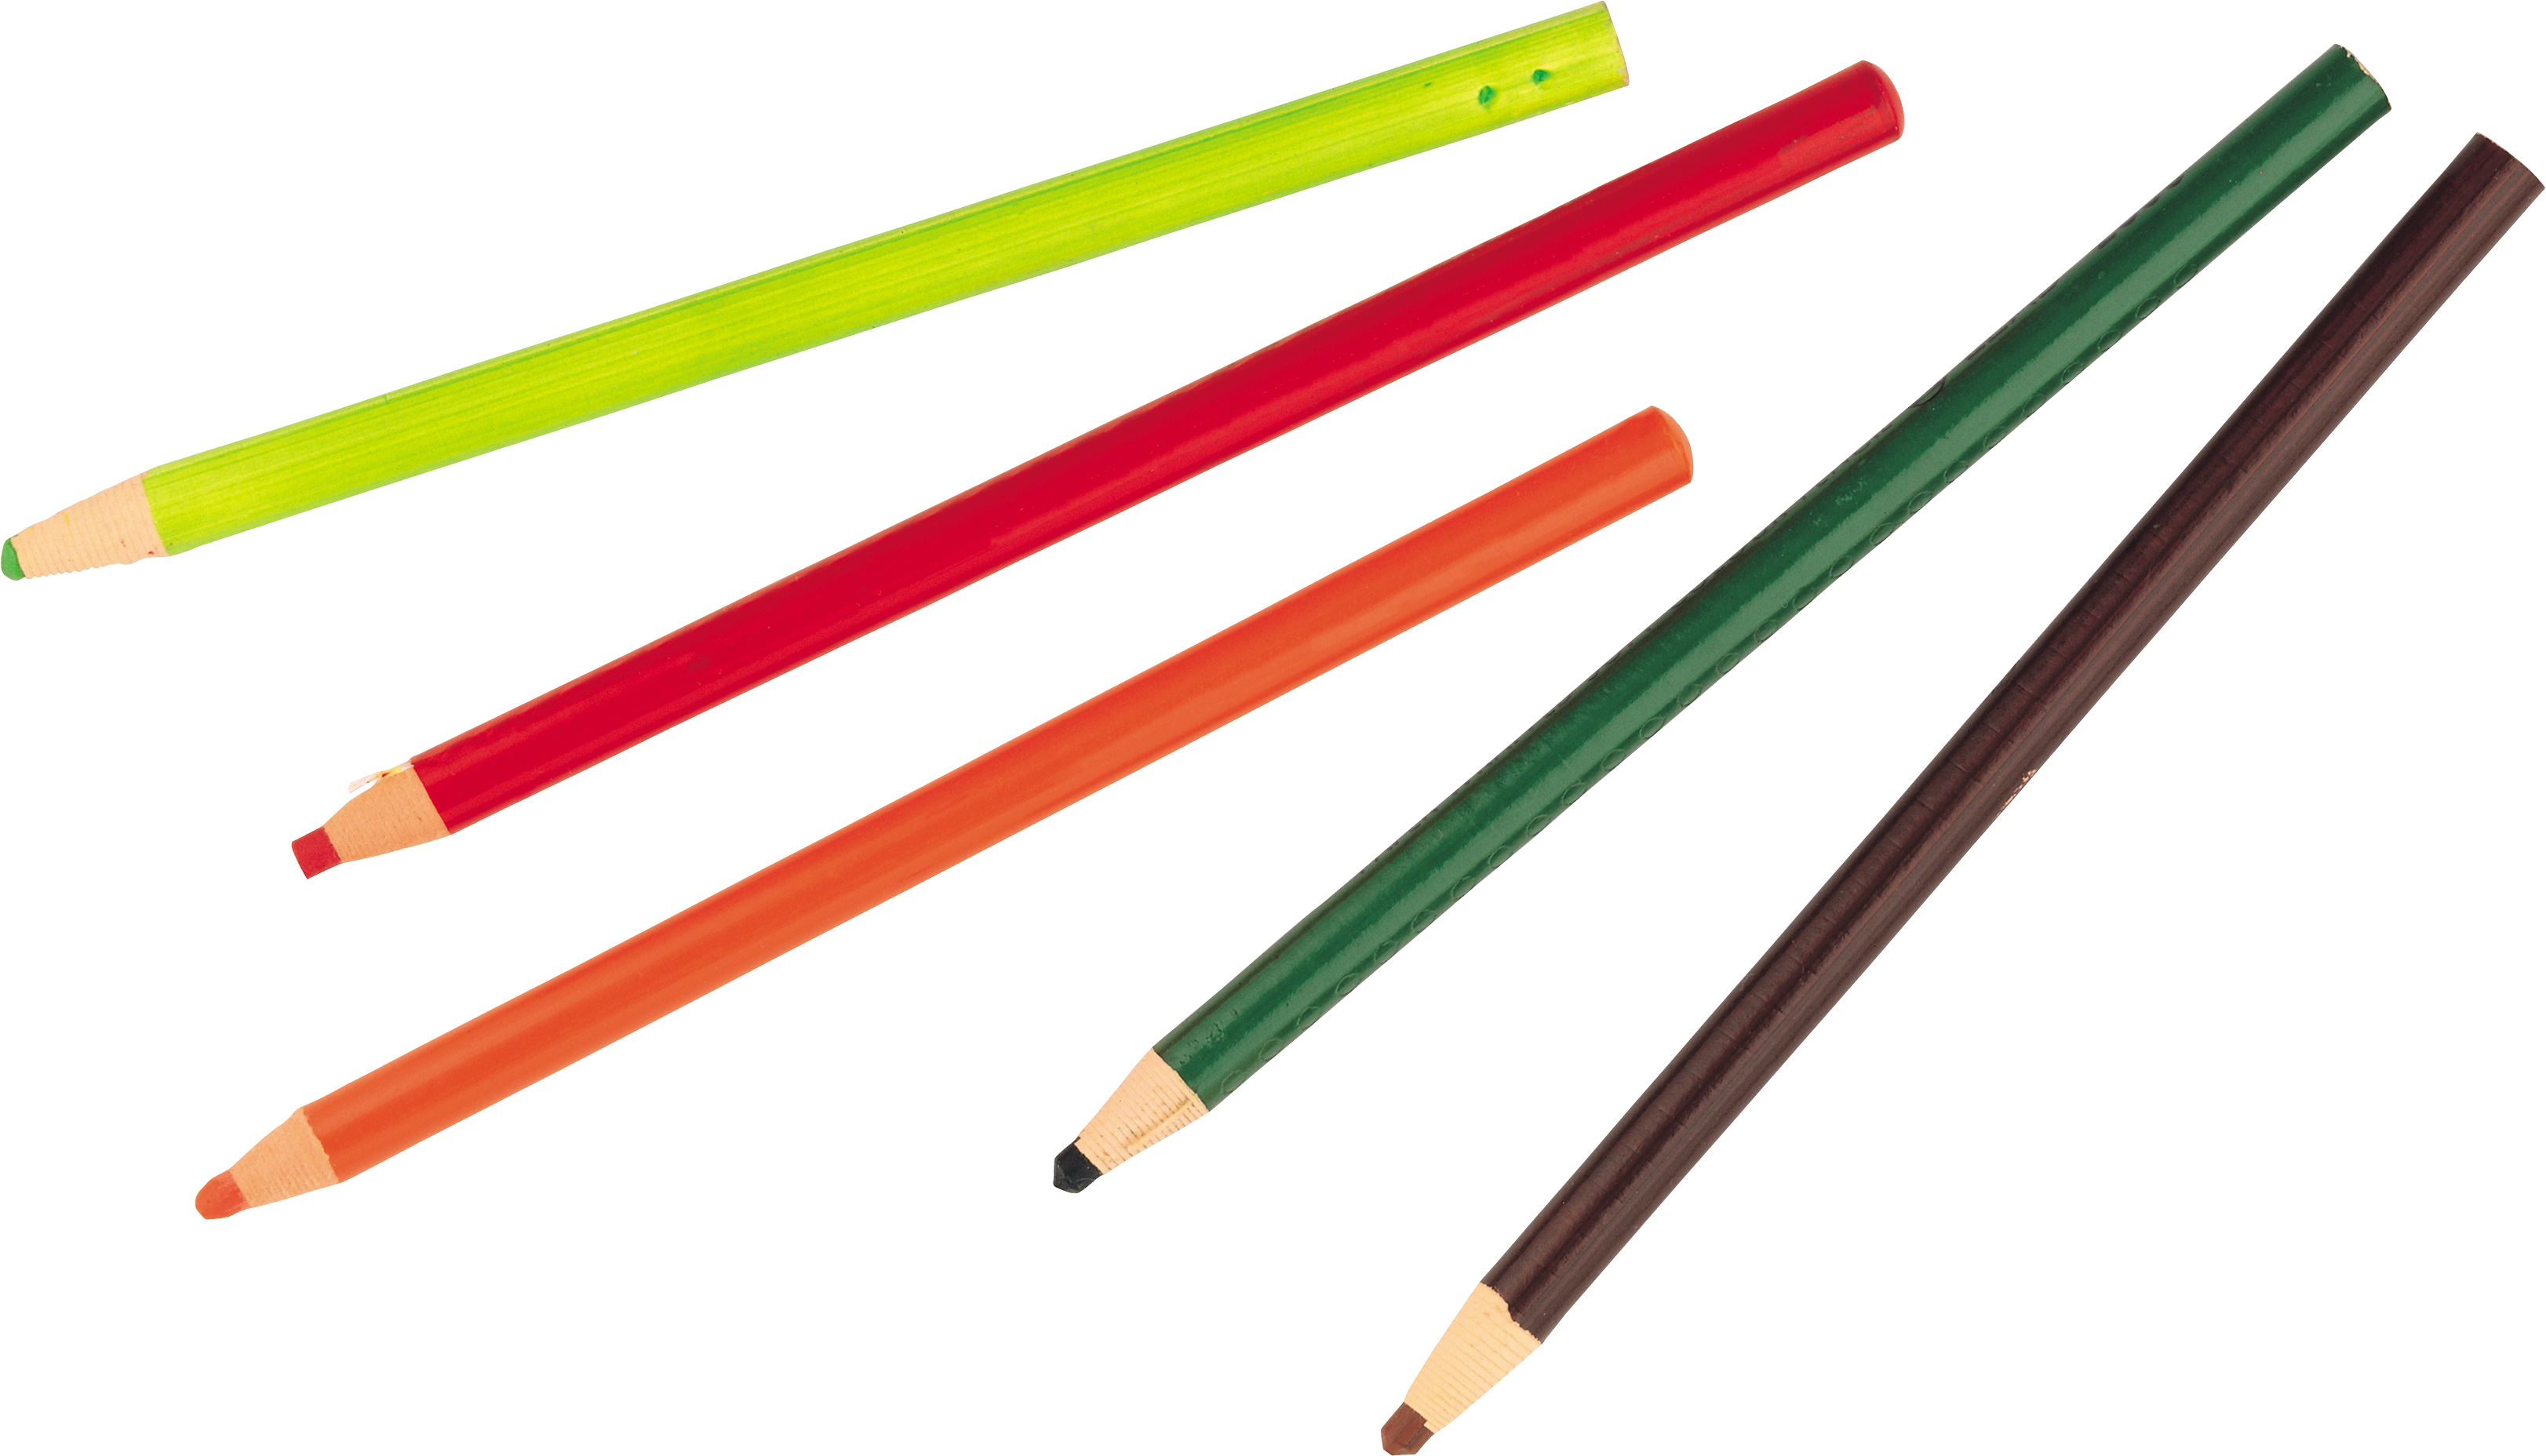 Tip Of Pencil PNG - 57085